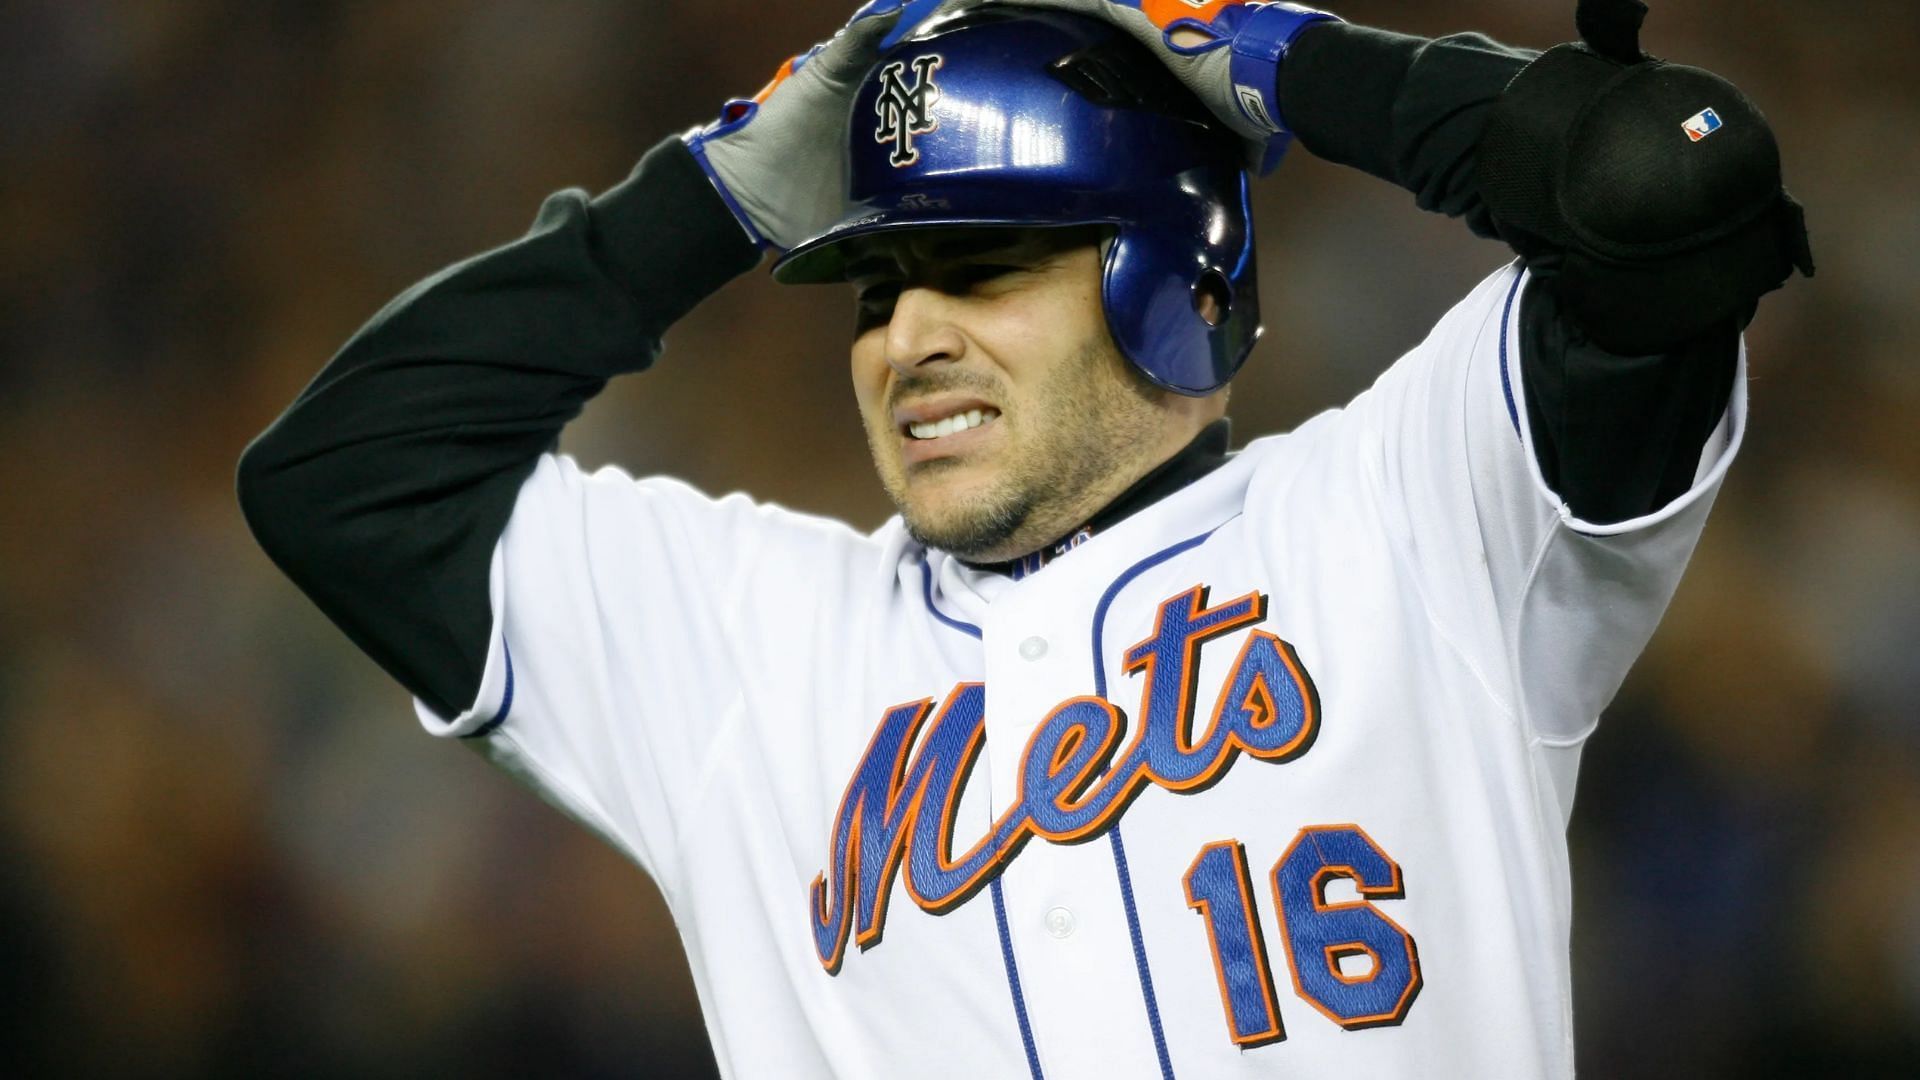 When former New York Mets star Paul Lo Duca lifted the veil on his